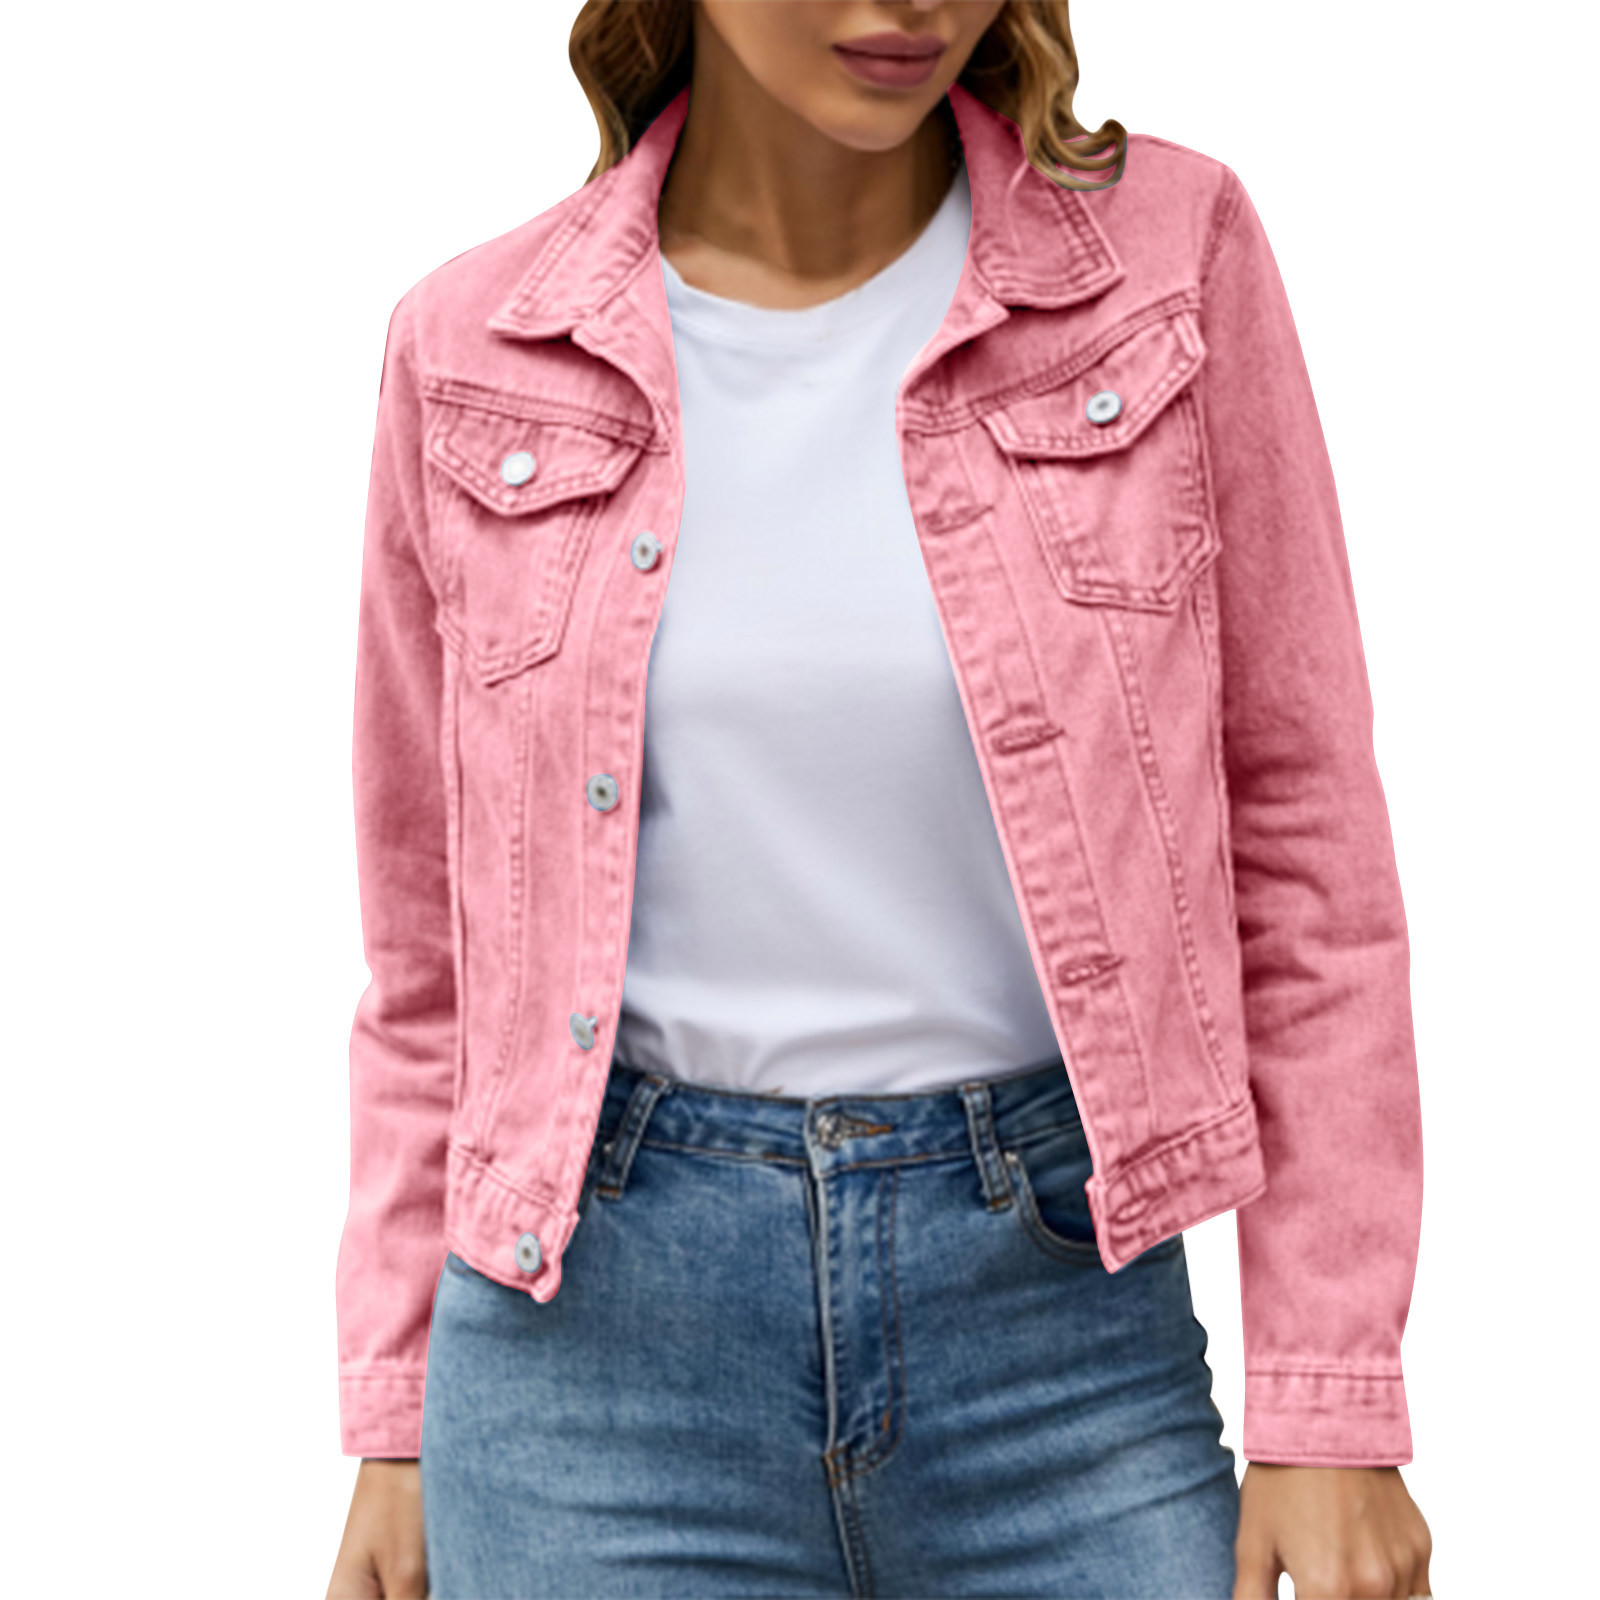 iOPQO womens sweaters Women's Basic Solid Color Button Down Denim Cotton Jacket With Pockets Denim Jacket Coat Women's Denim Jackets Pink S - image 1 of 9